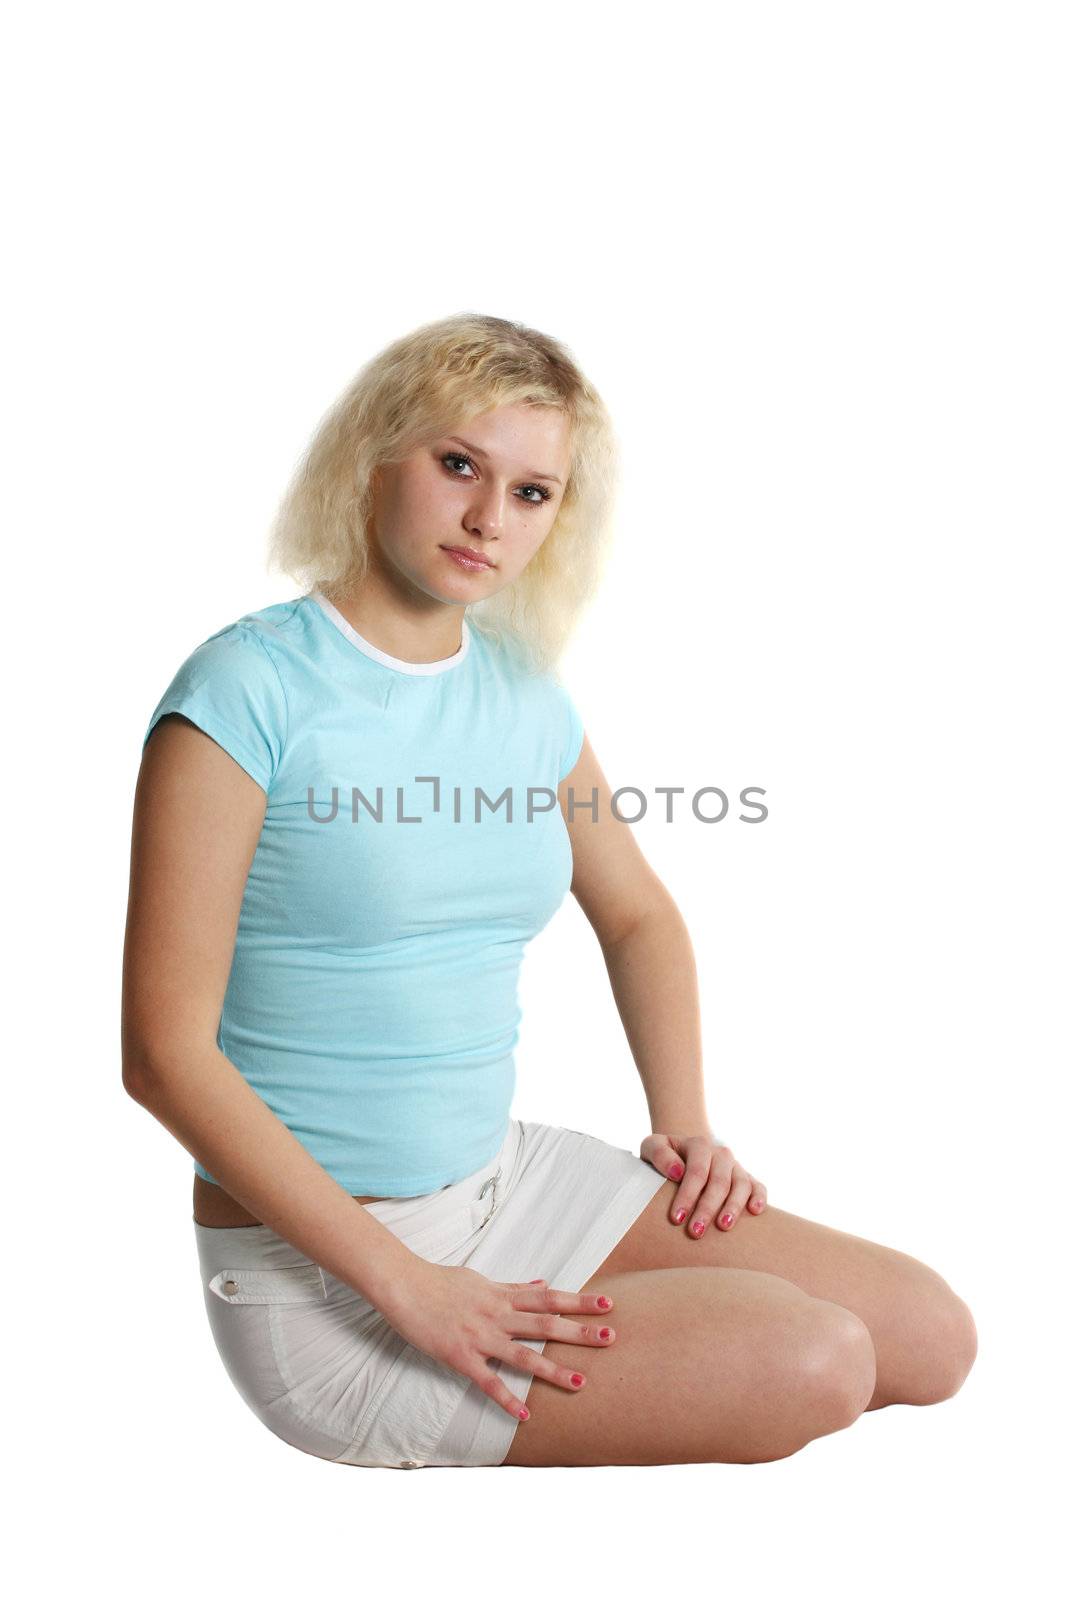 The blond girl poses in a short skirt 